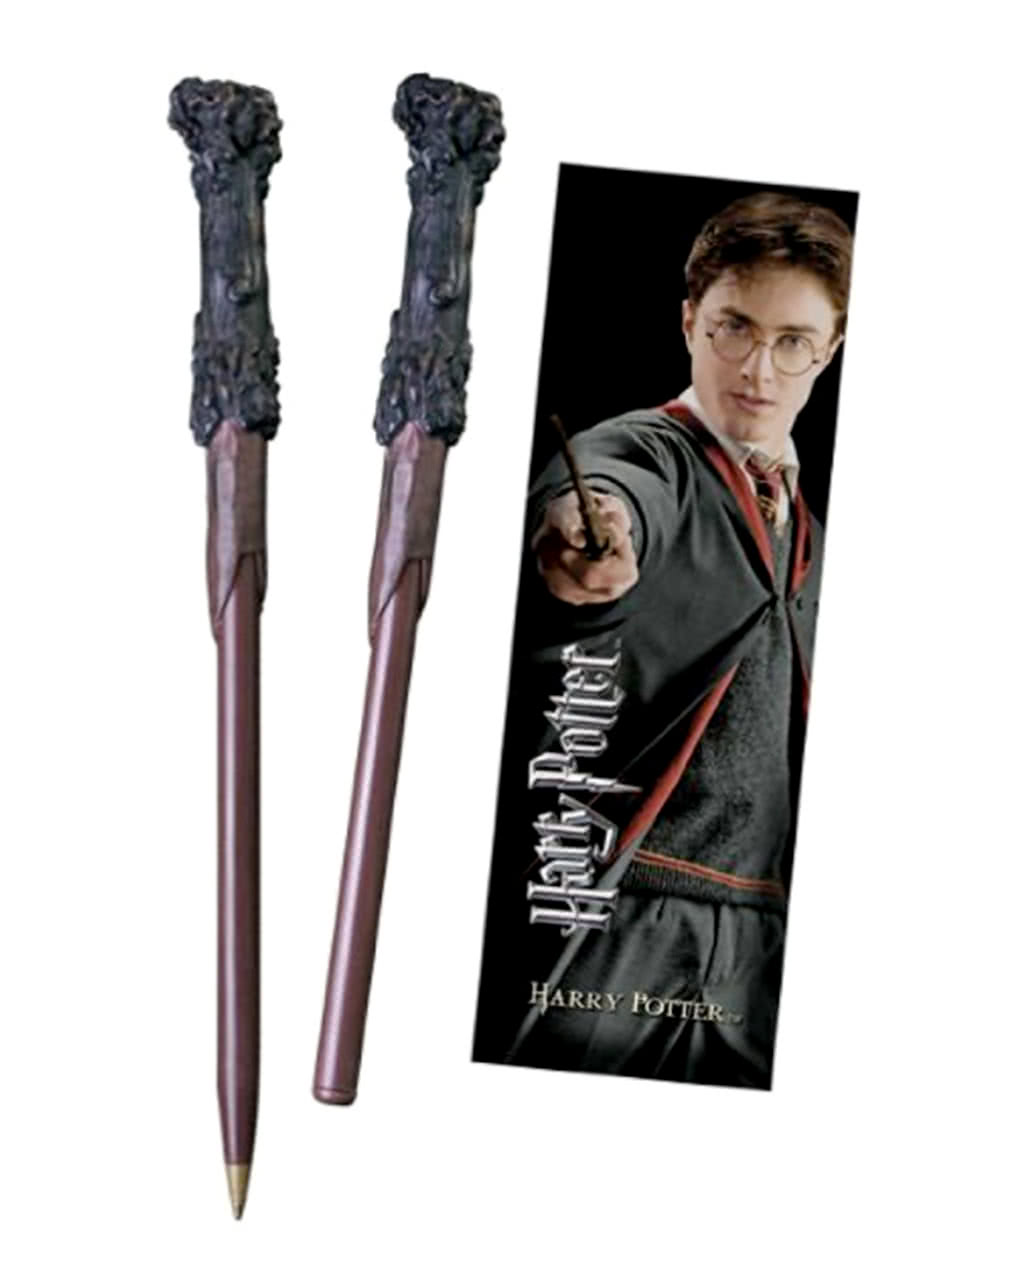 Harry Potter Wand Pen & Bookmark for fans